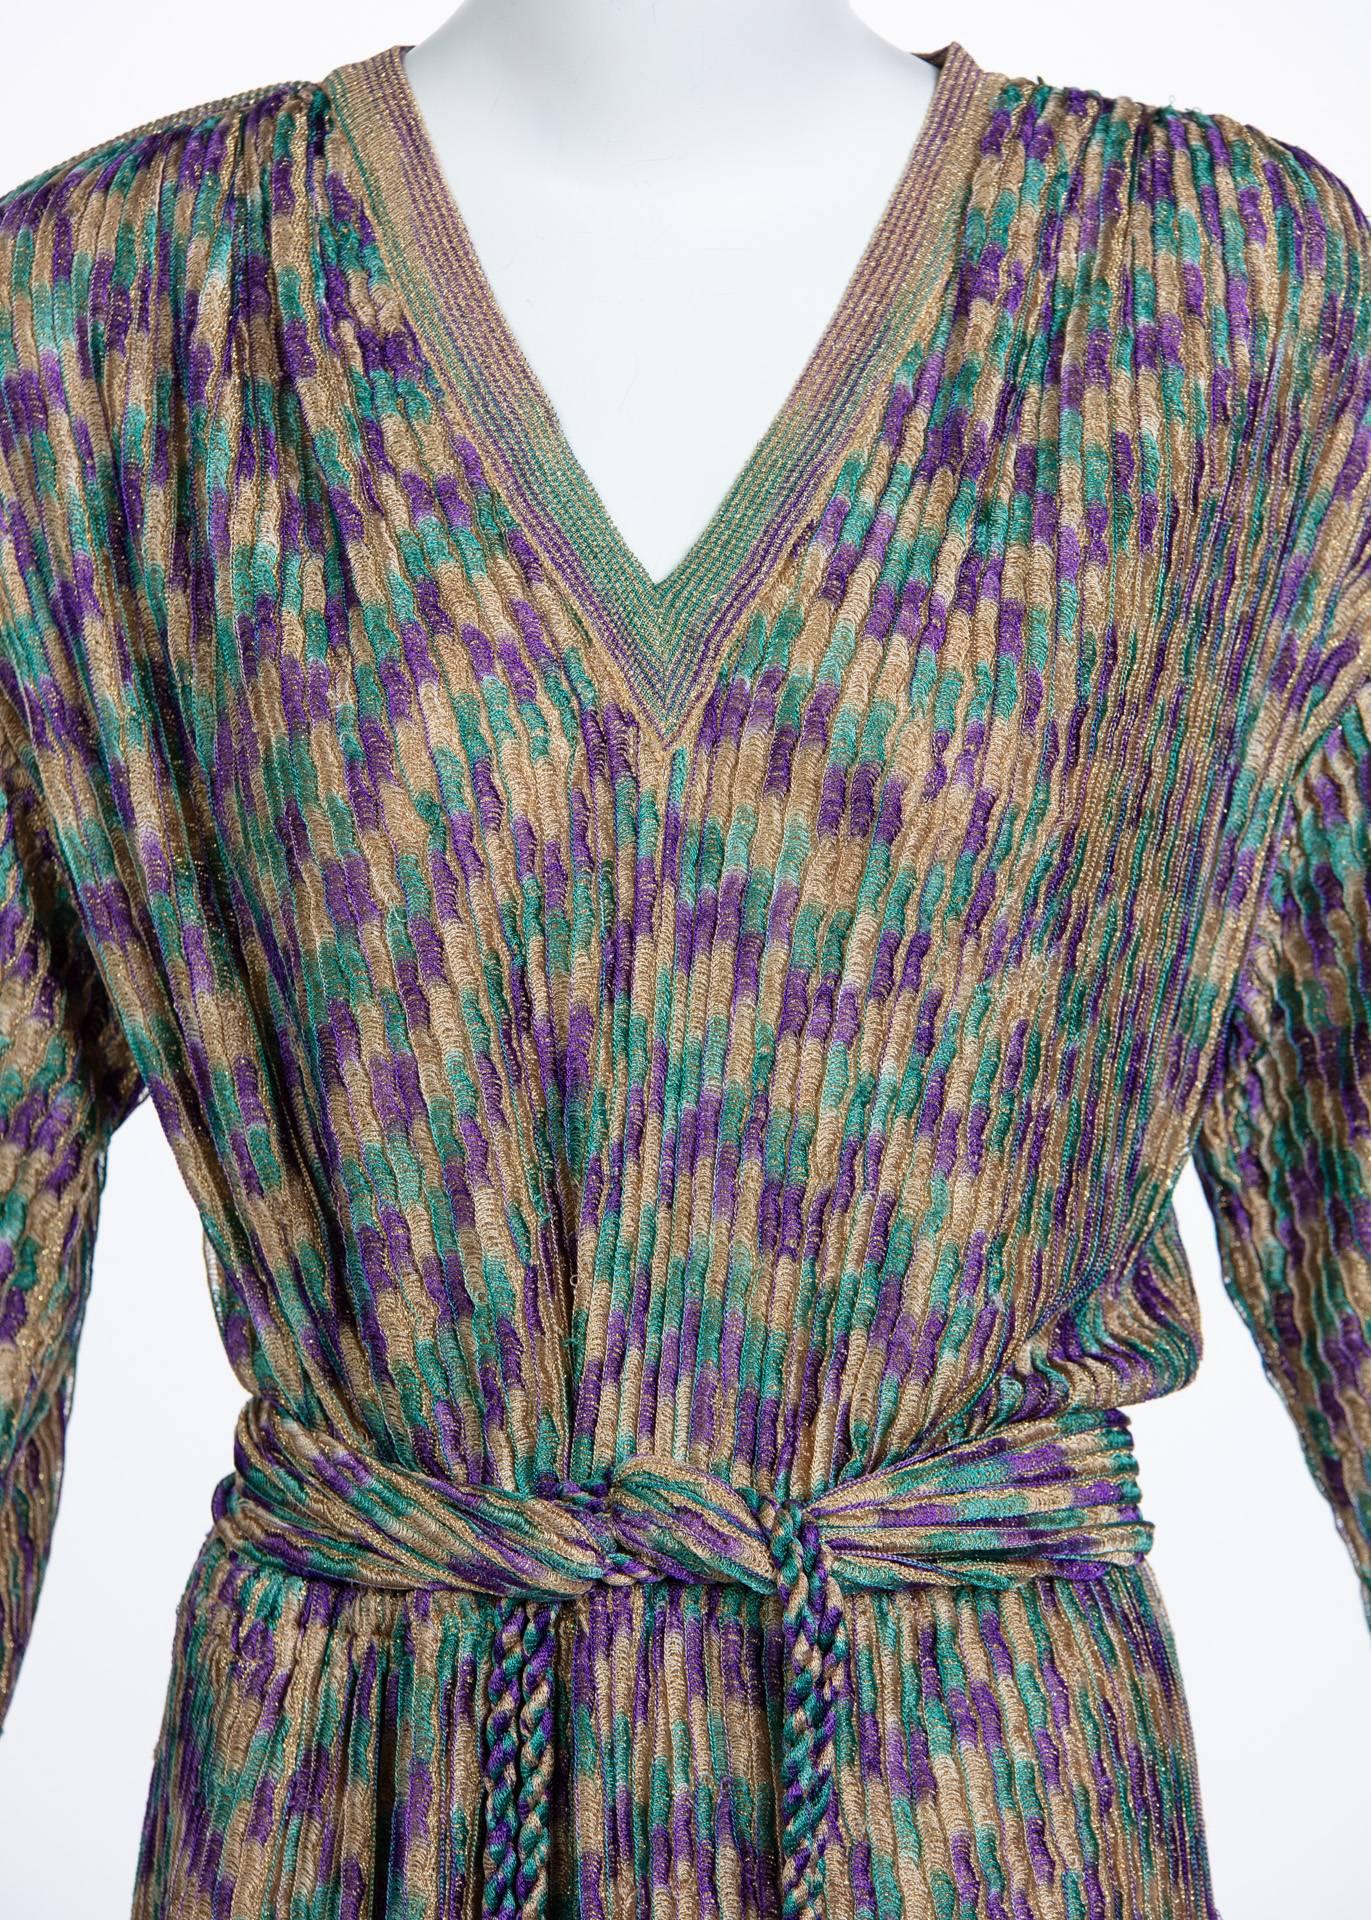 Missoni Multicolored Jewel Tone Metallic Knit Belted Dress, 1970s  For Sale 1